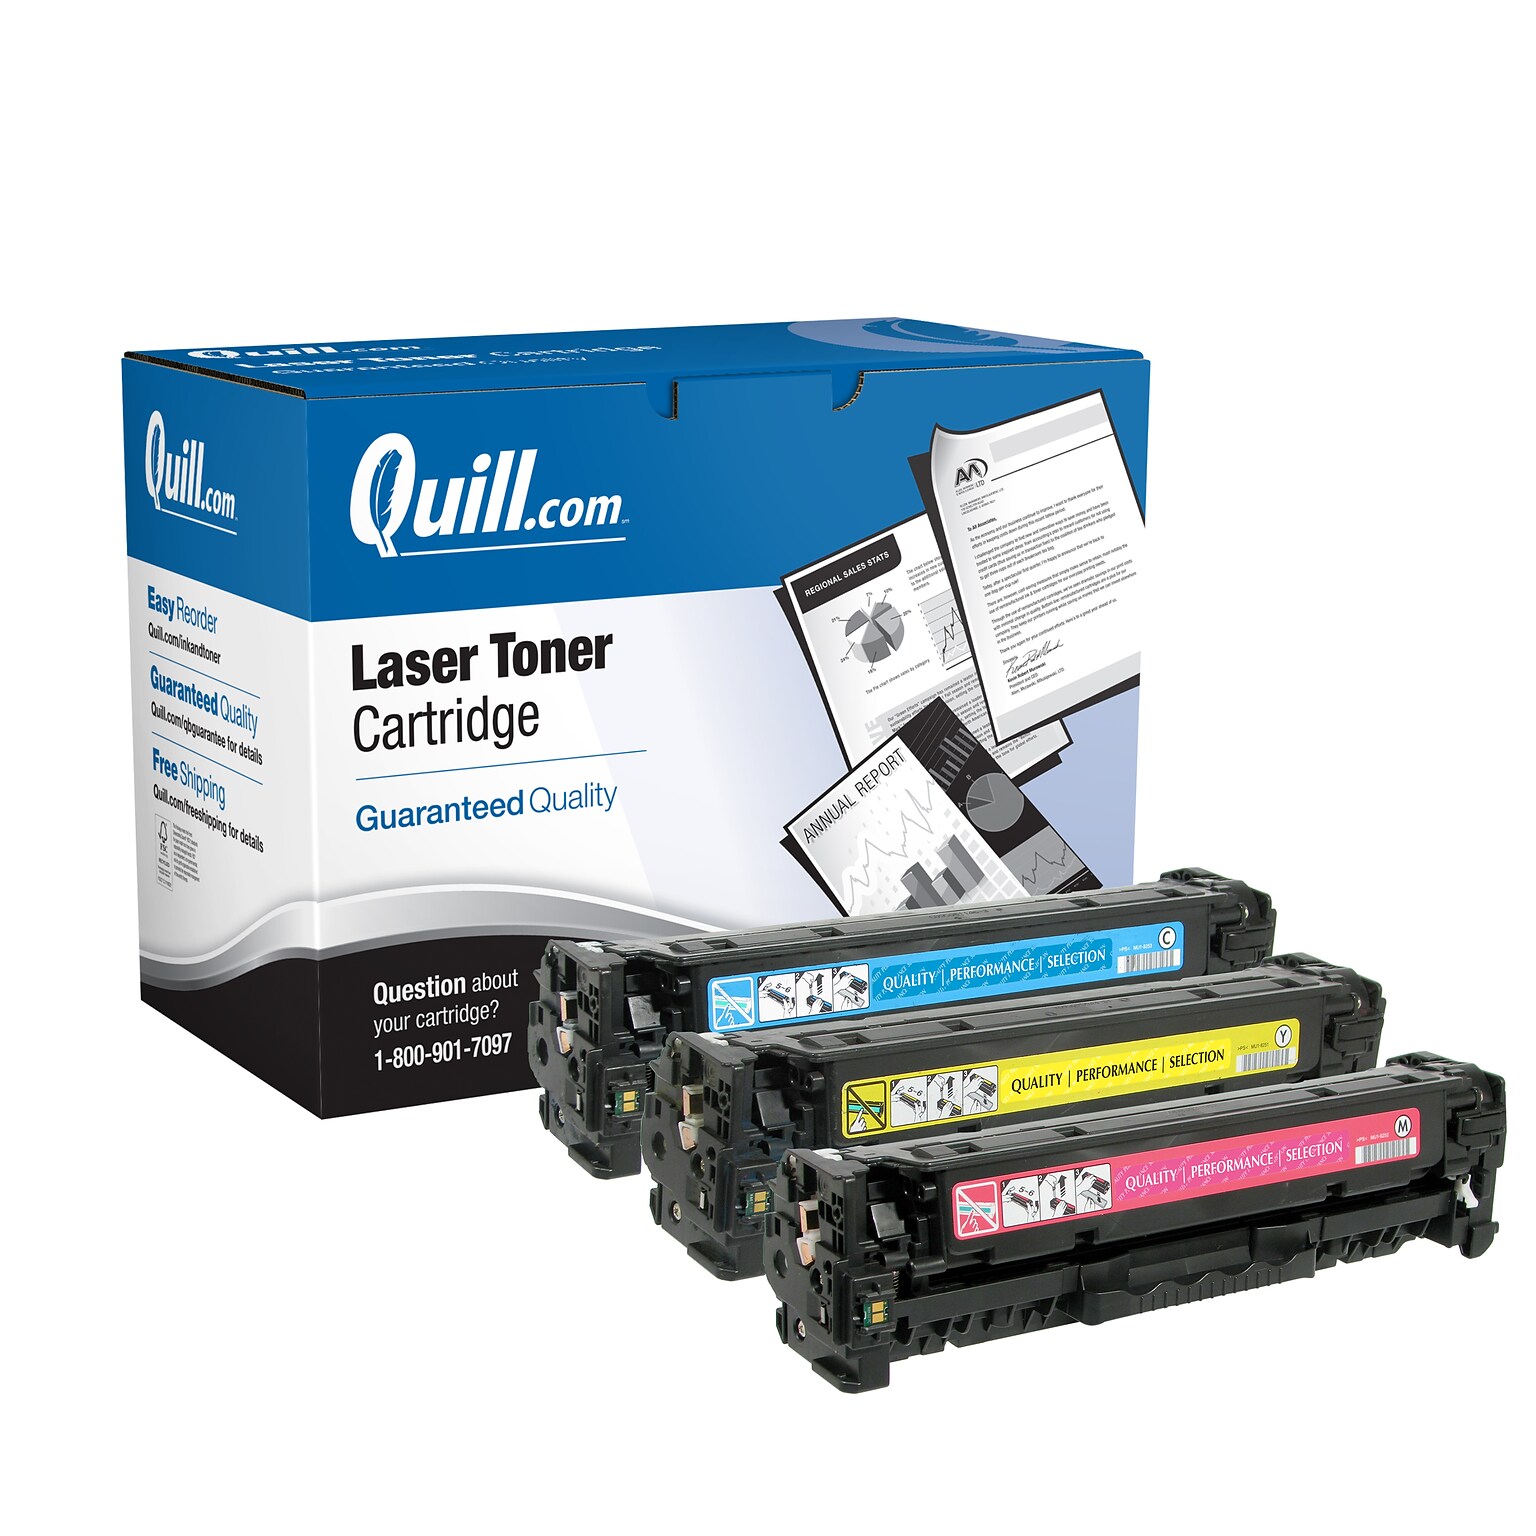 Quill Brand® Remanufactured Cyan/Magenta/Yellow Standard Yield Toner Cartridge Replacement for HP 304A (CF340A), 3/Pack